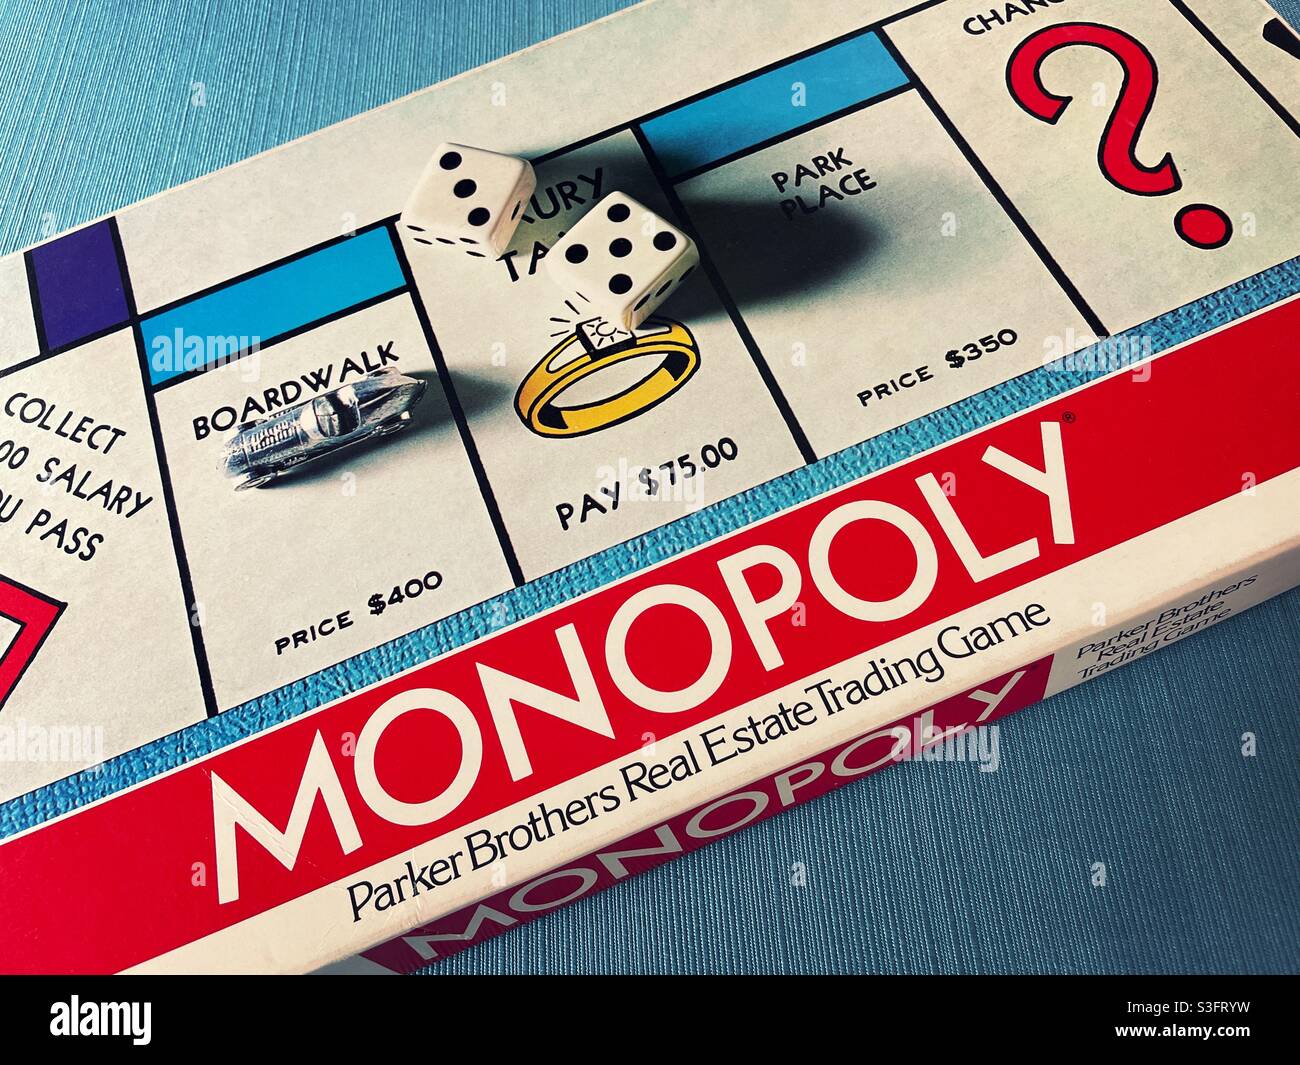 Monopoly is a real estate trading board game, USA Stock Photo - Alamy